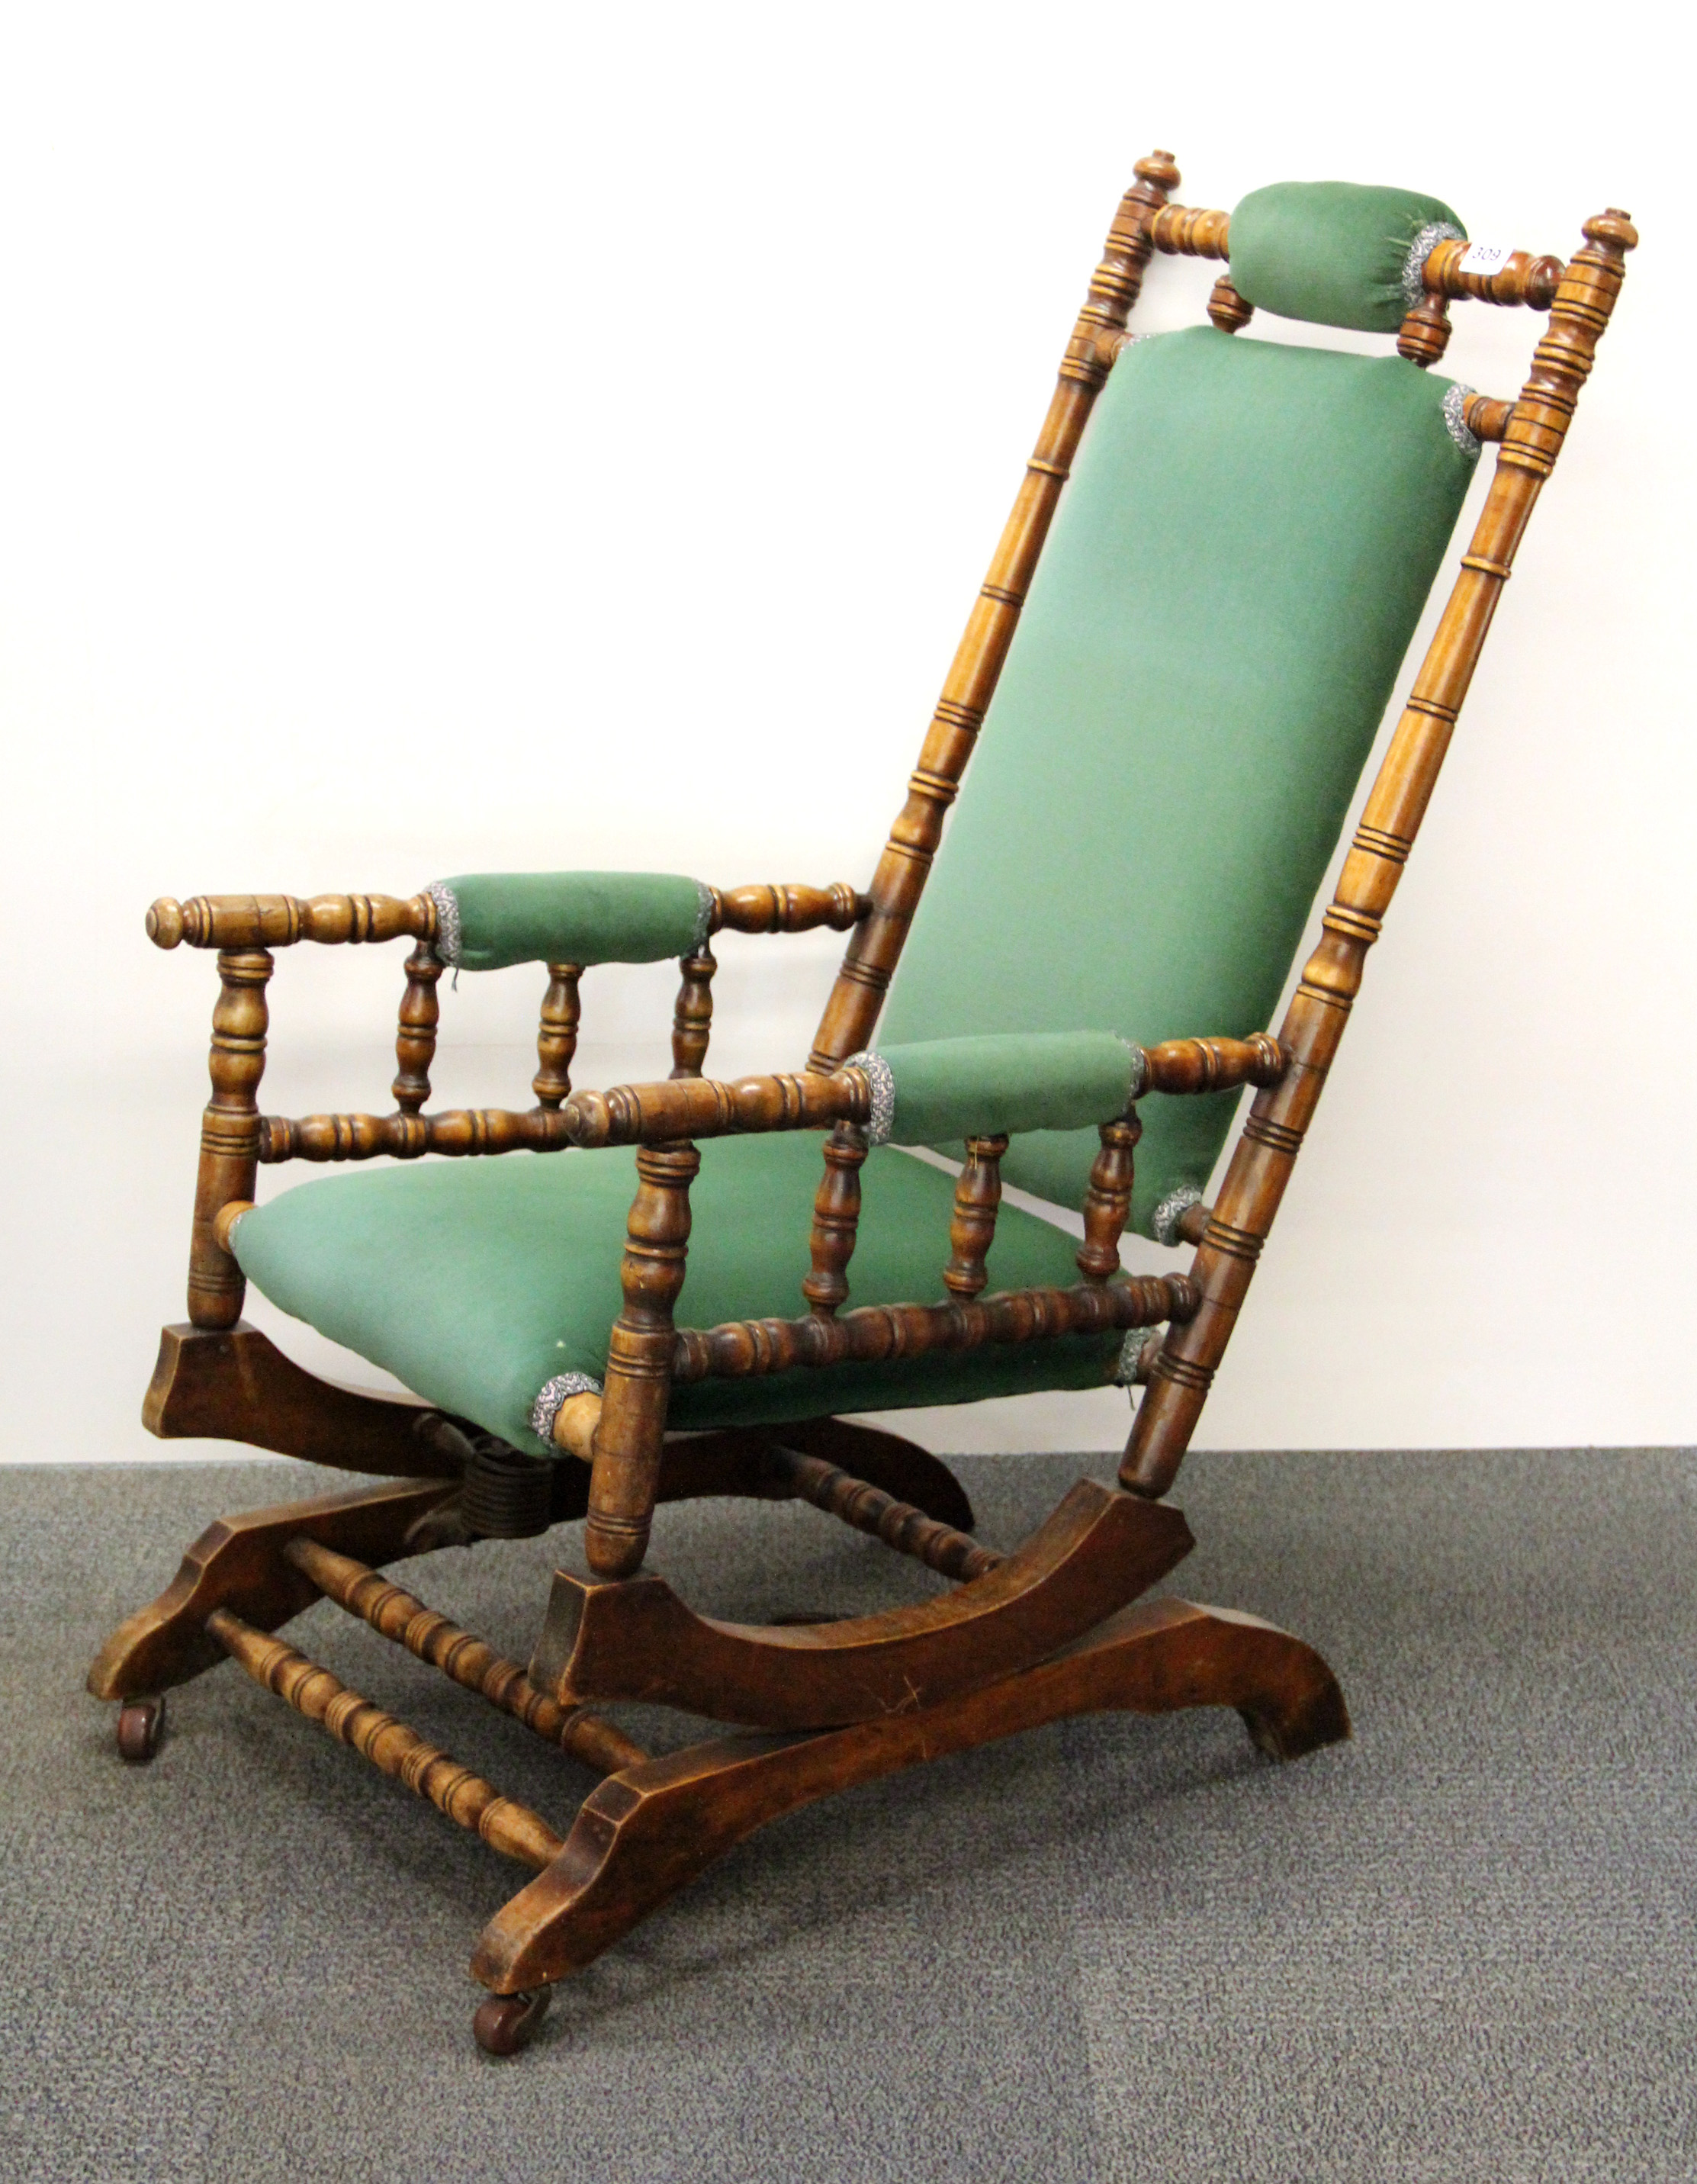 A 19th century American style rocking chair. - Image 2 of 2